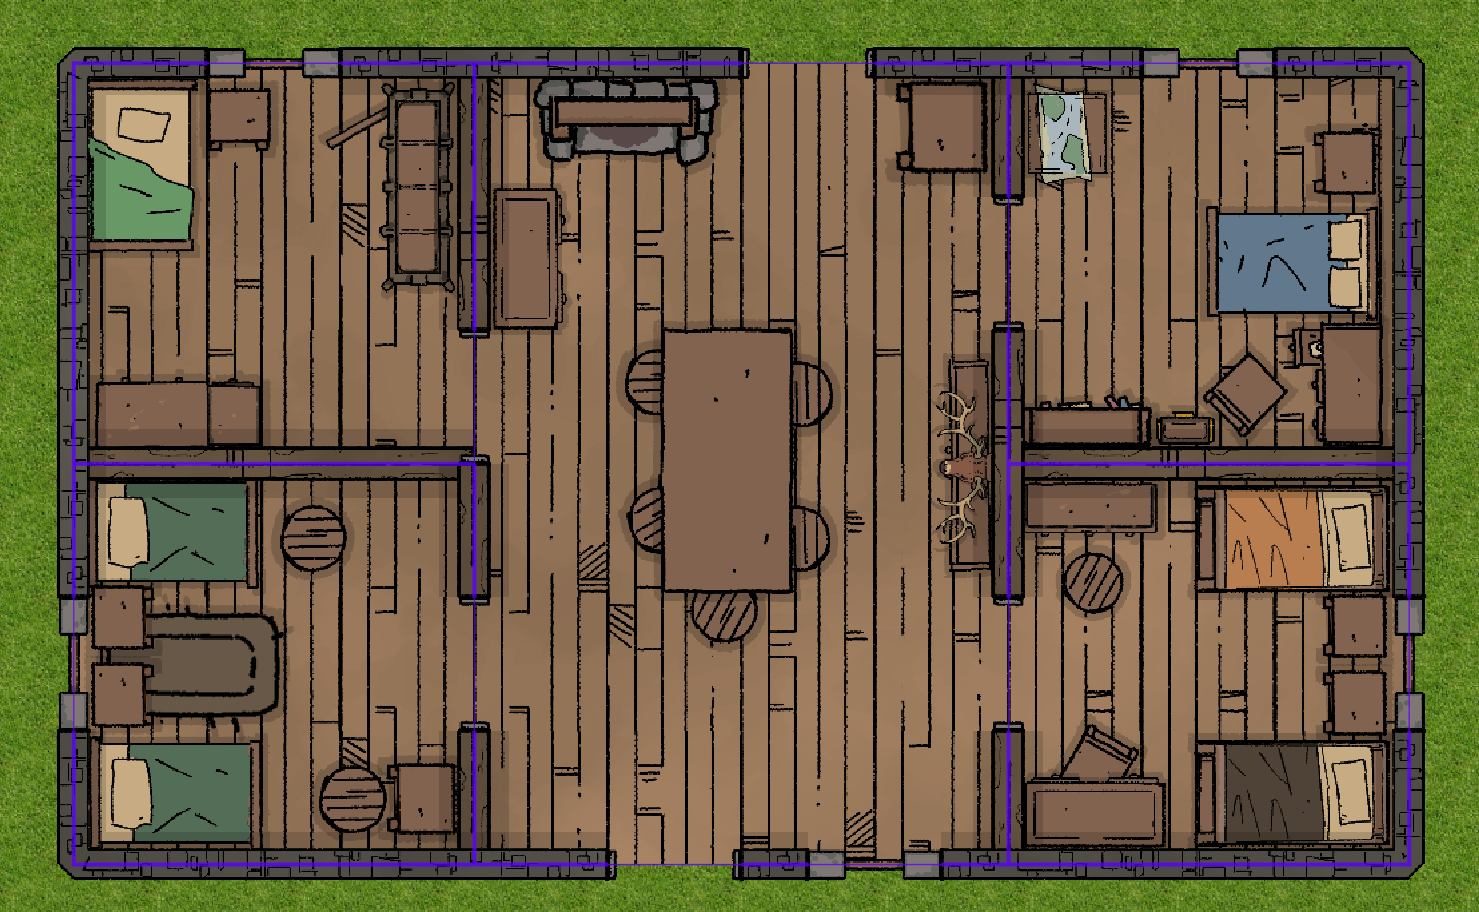 Thumbnail for File:Dungeondraft Map Imported.png